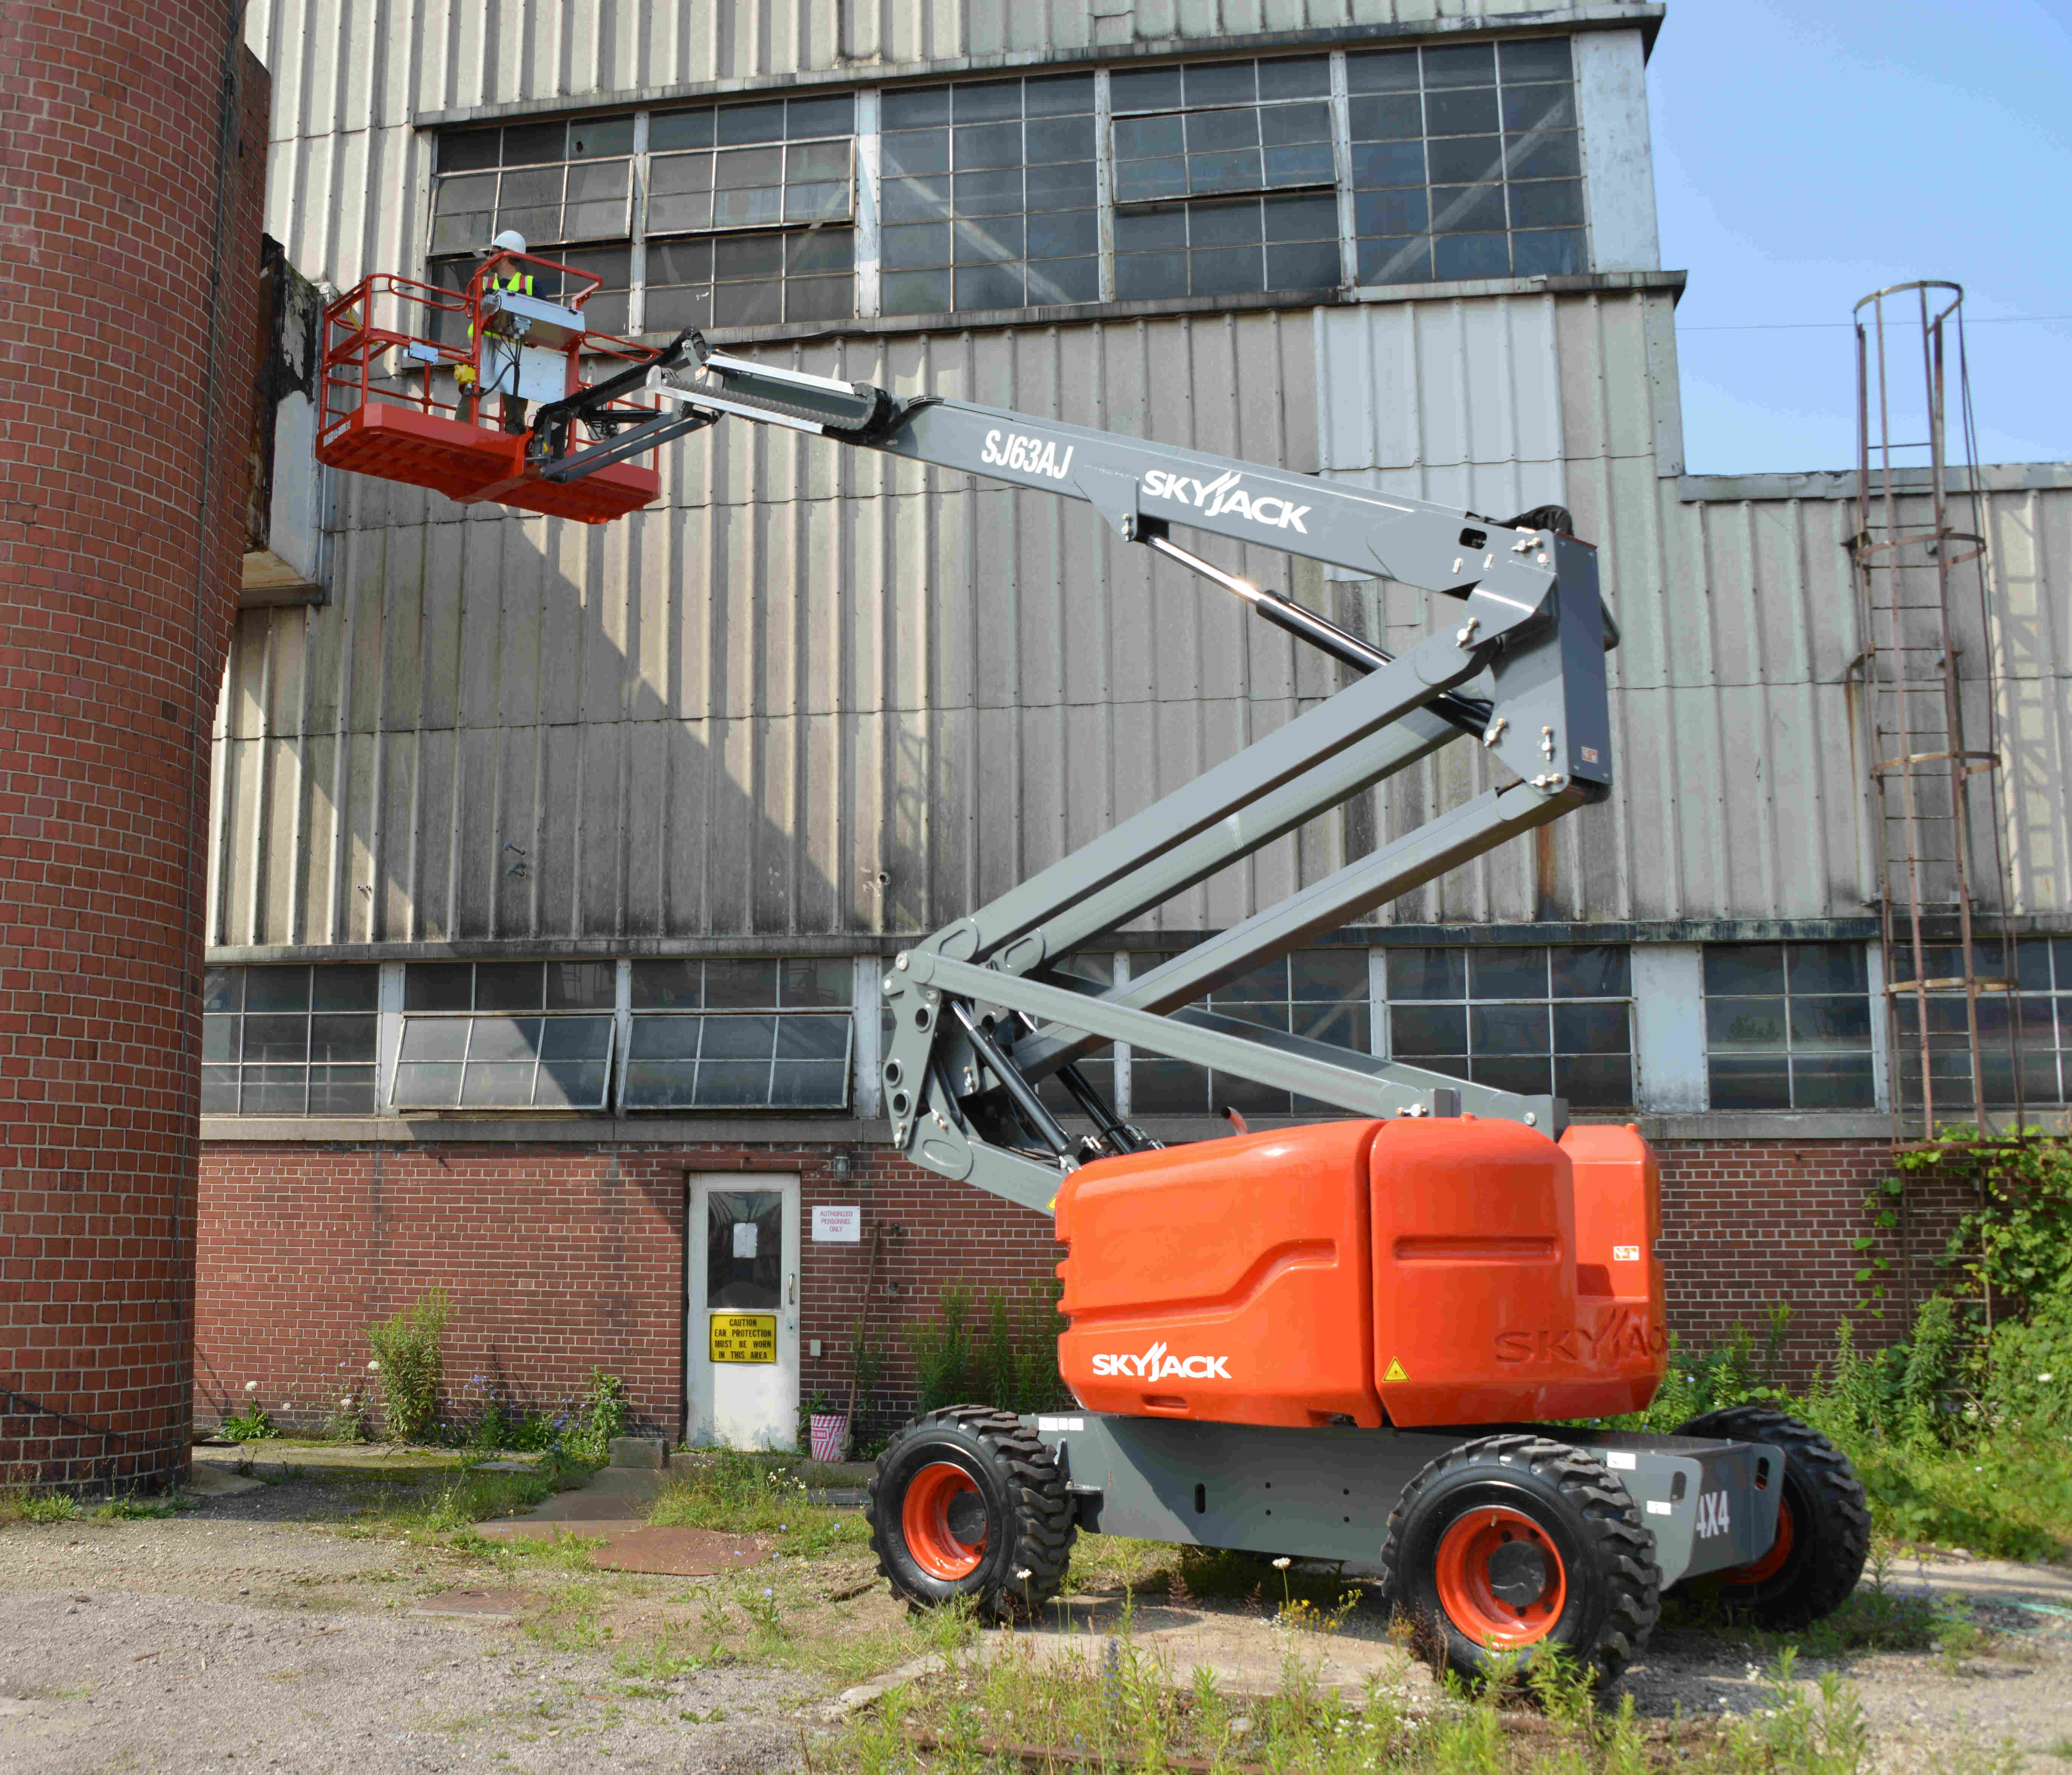 Self-Propelled Articulated Boomlifts